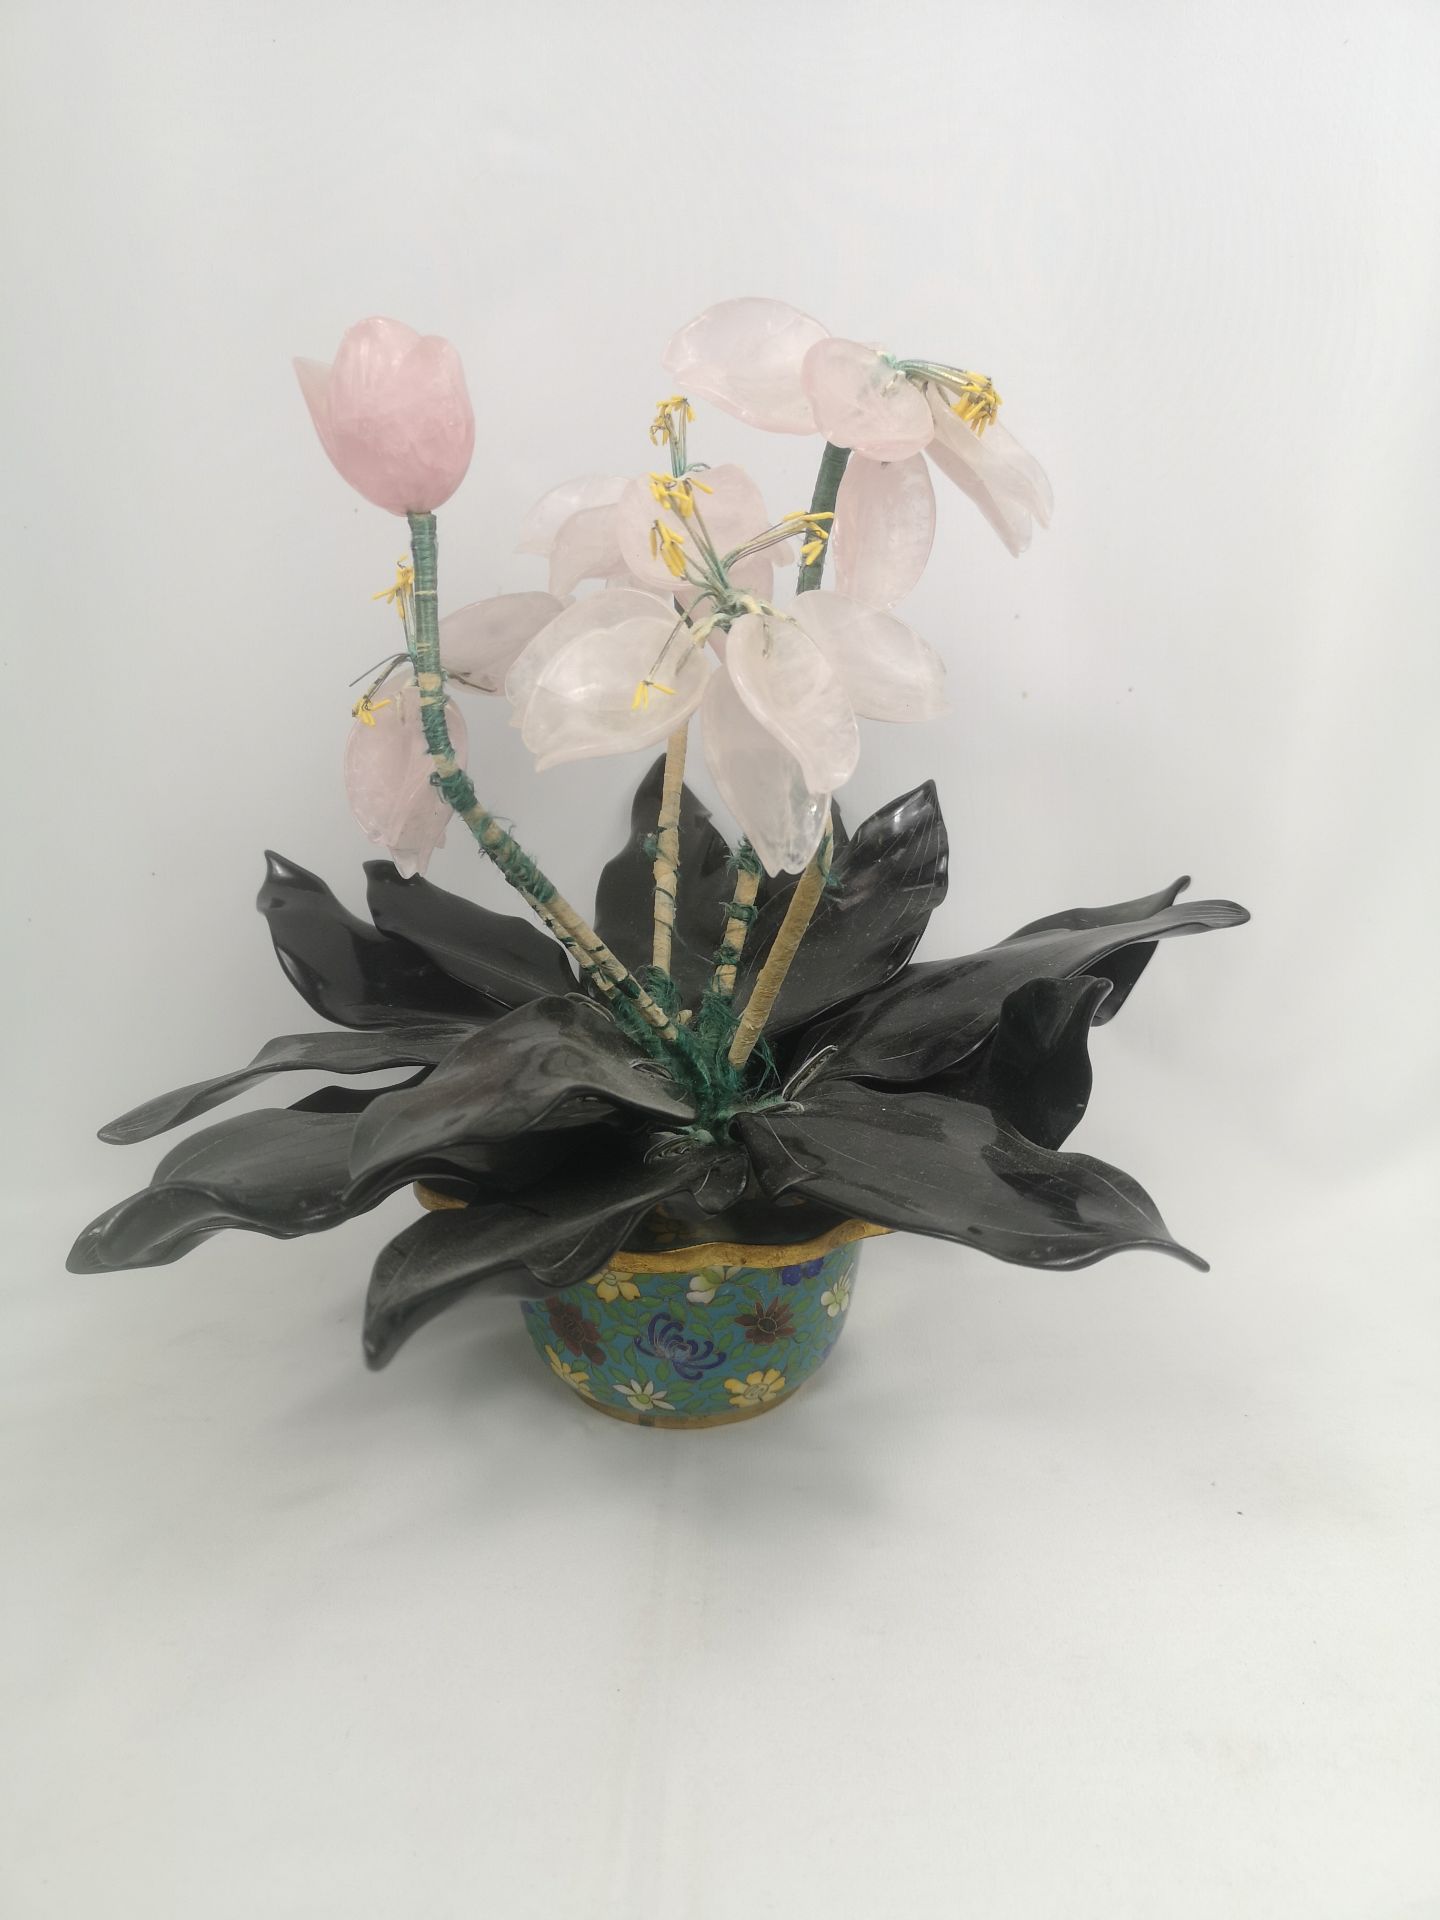 Cloisonne flower pot containing a hardstone plant - Image 4 of 4